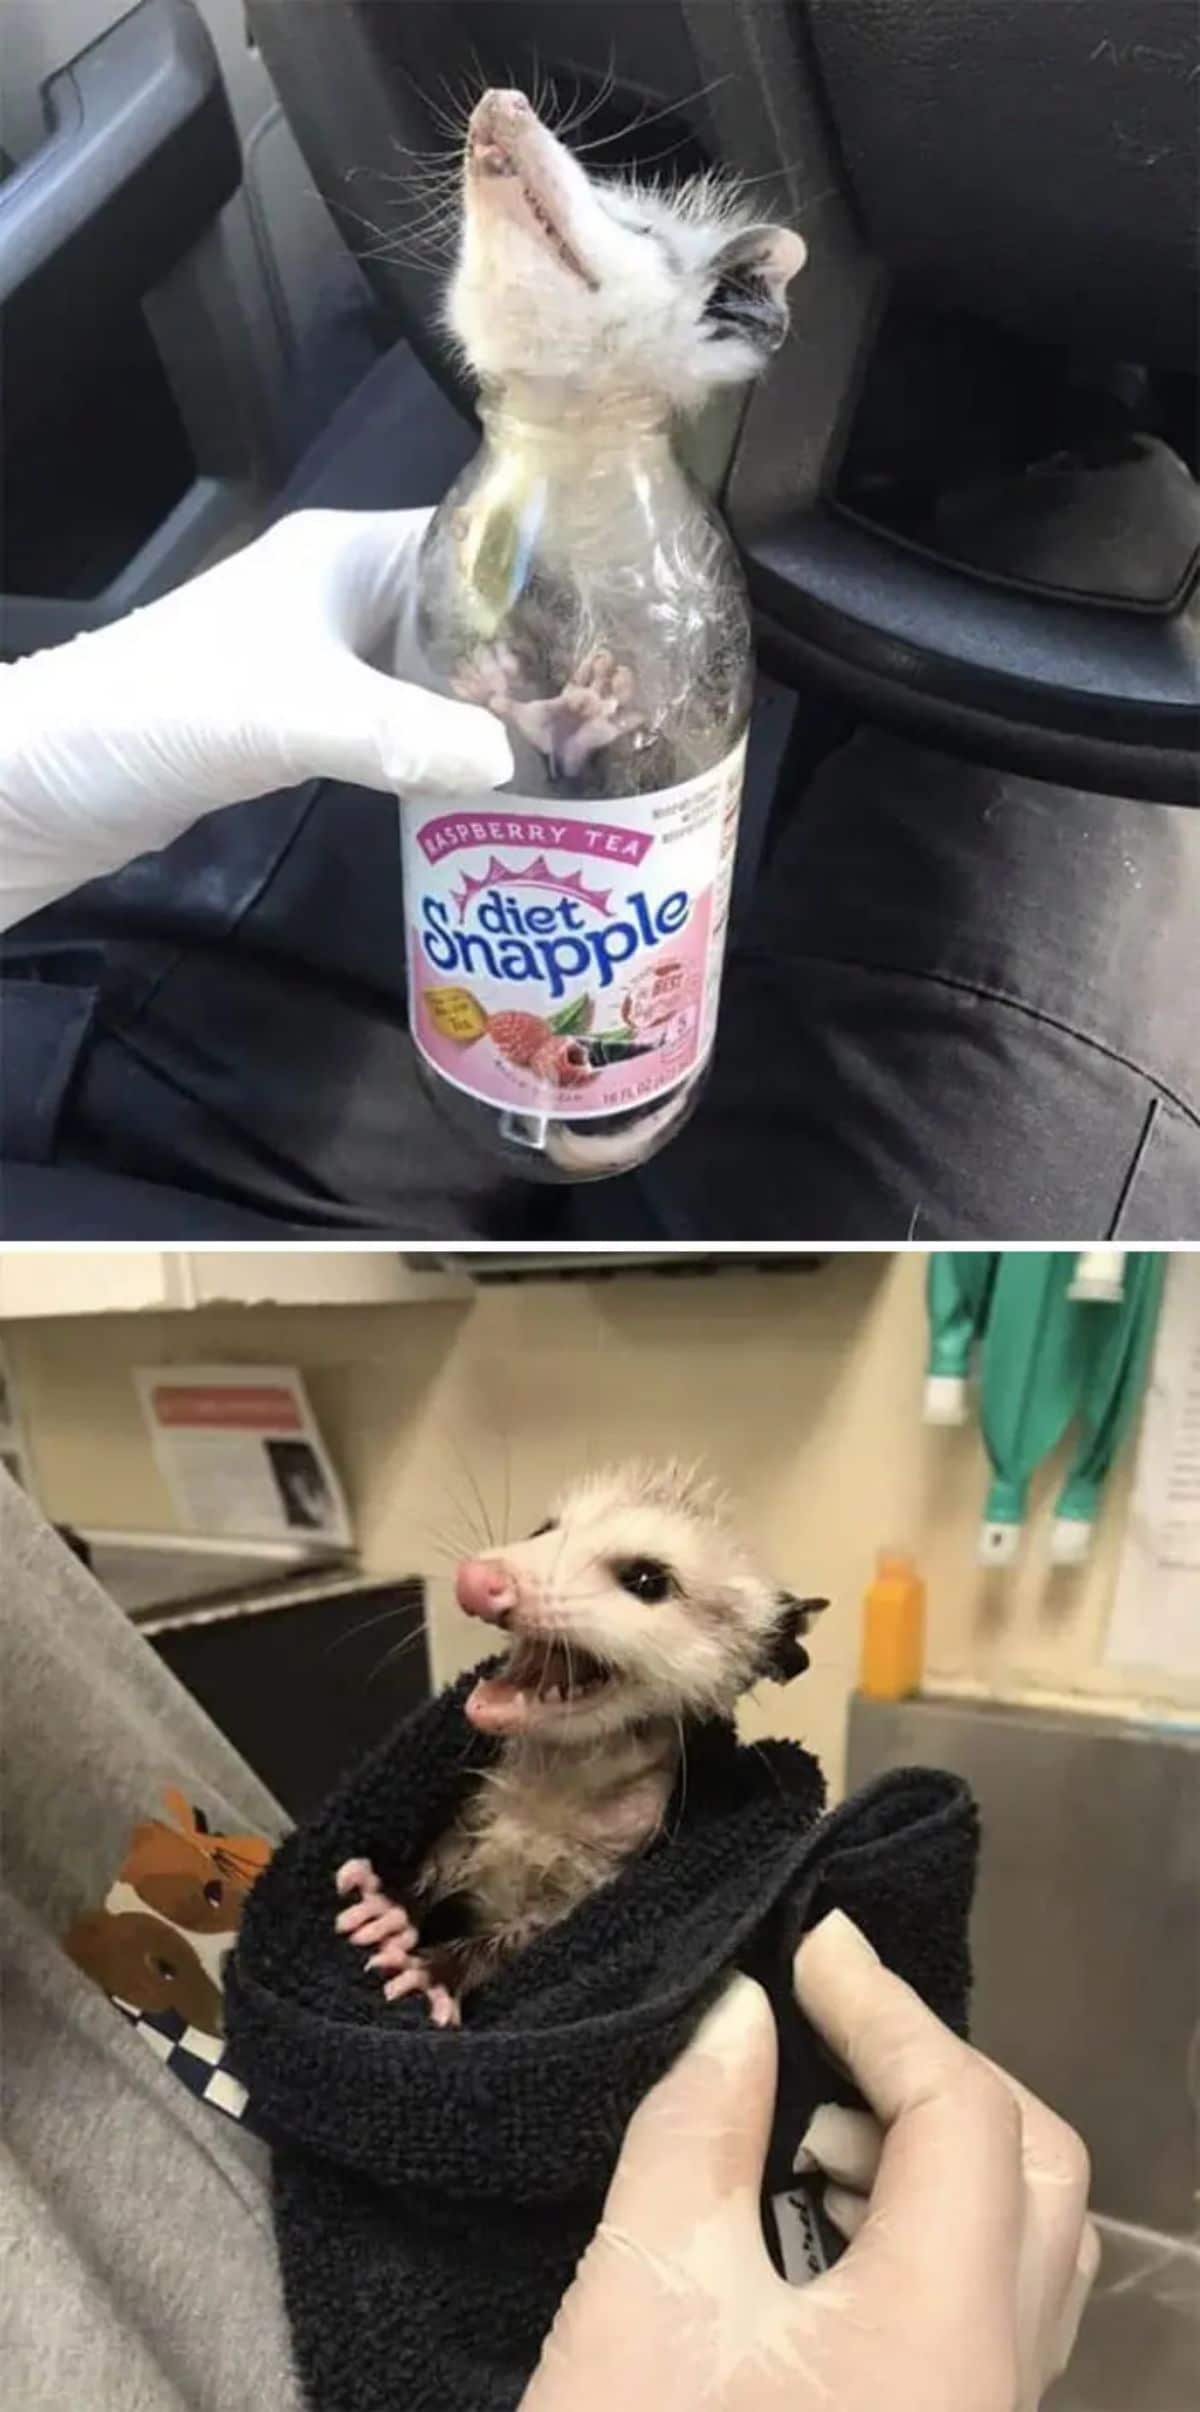 2 photos of an opossum stuck in a plastic bottle with the head sticking out and then rescued and being wrapped in a black blanket